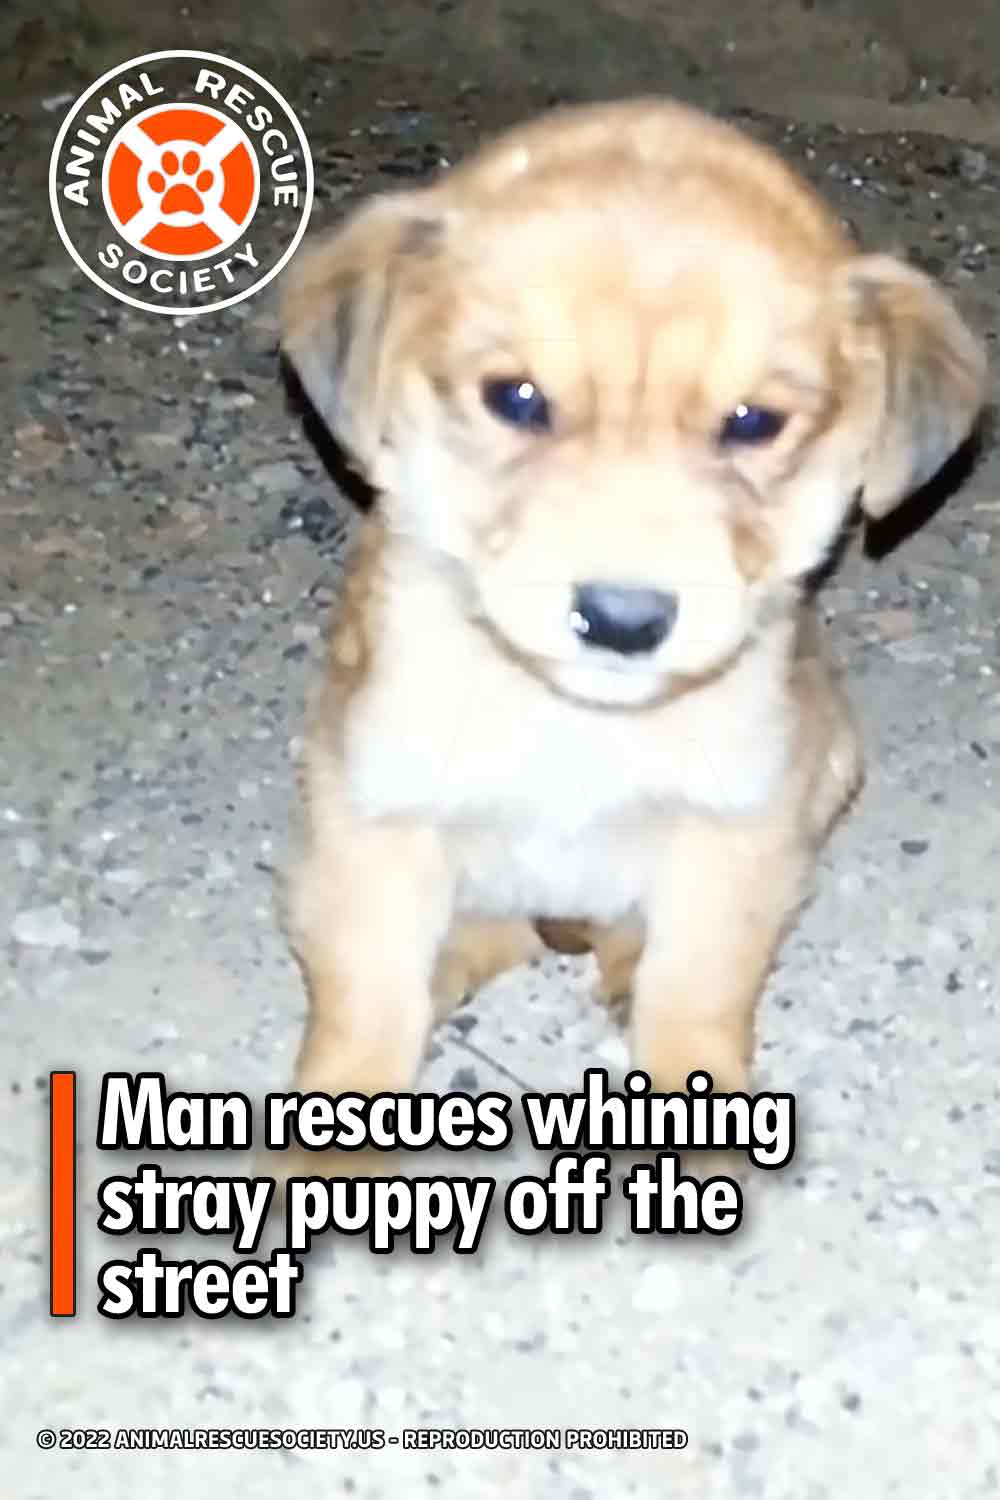 Man rescues whining stray puppy off the street